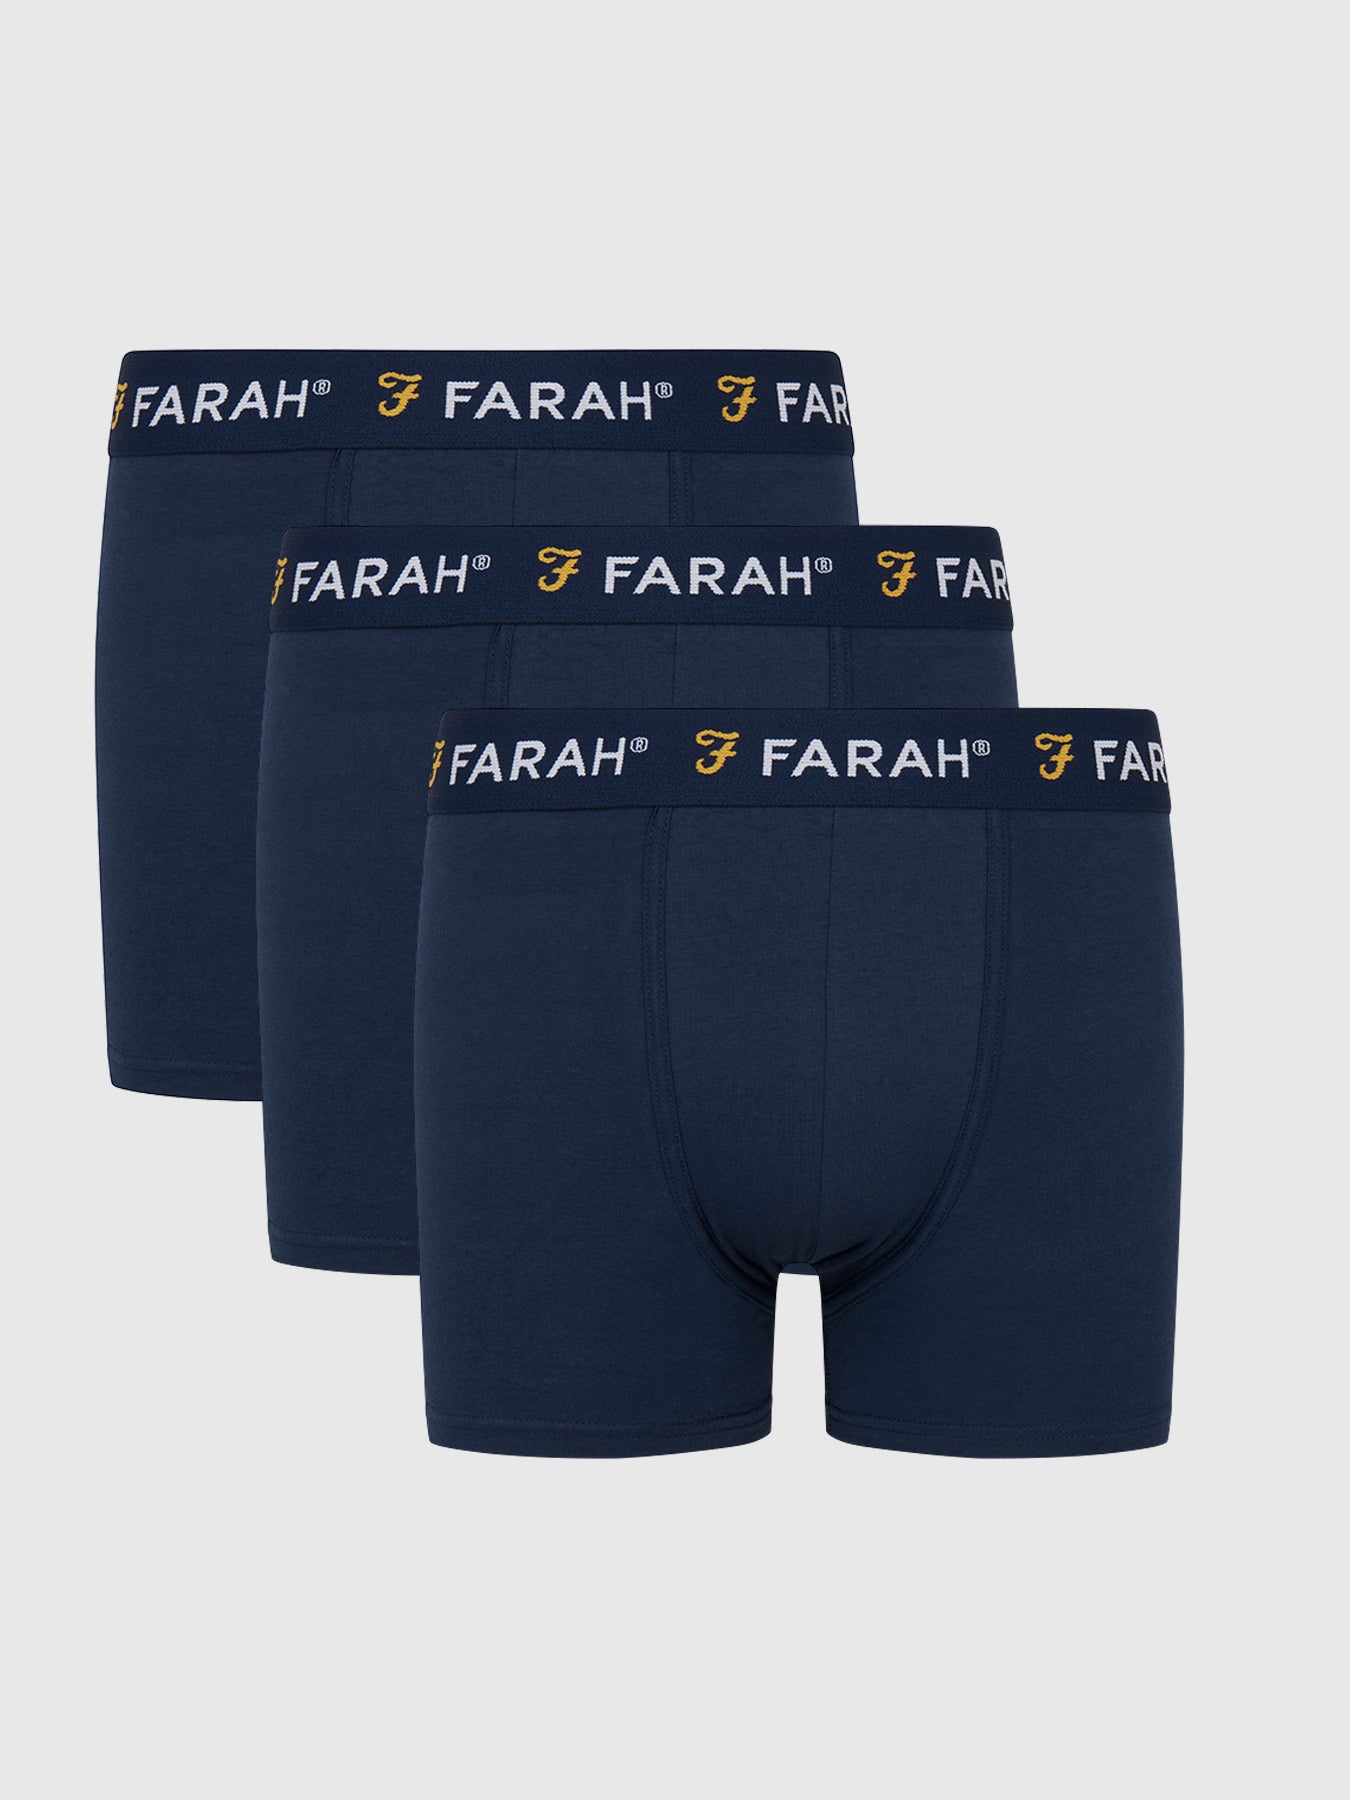 View Callow 3 Pack Boxers In Navy information